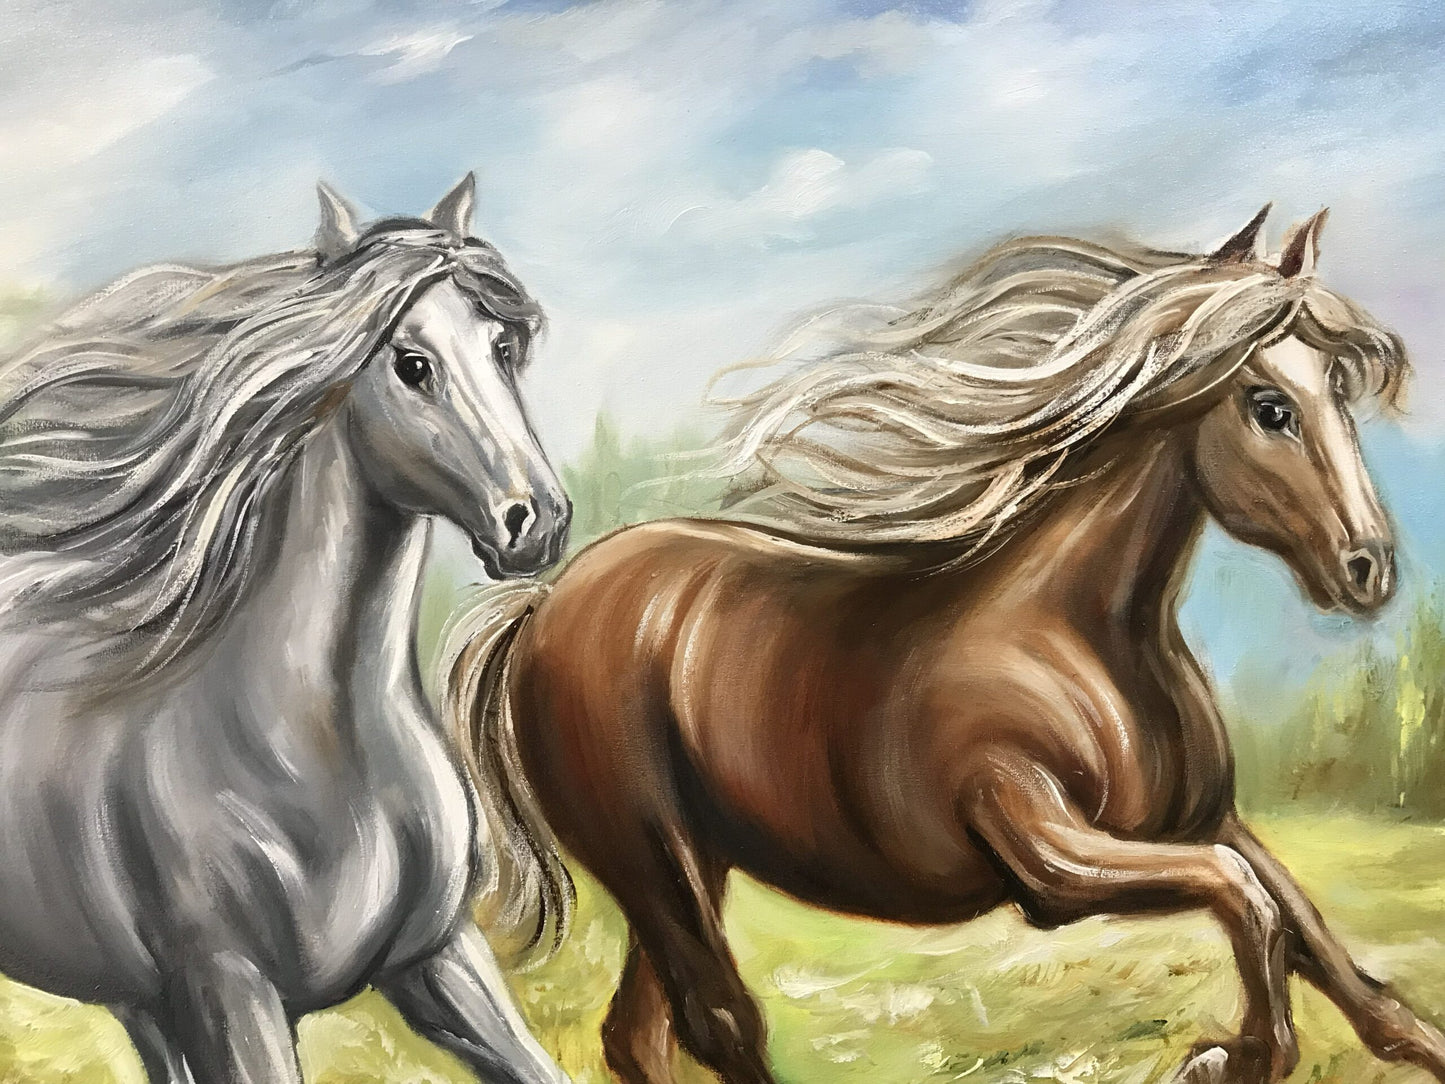 2 Running Horses Oil Painting on Canvas Wild Animal Wall Art Brown and White Horse Painting